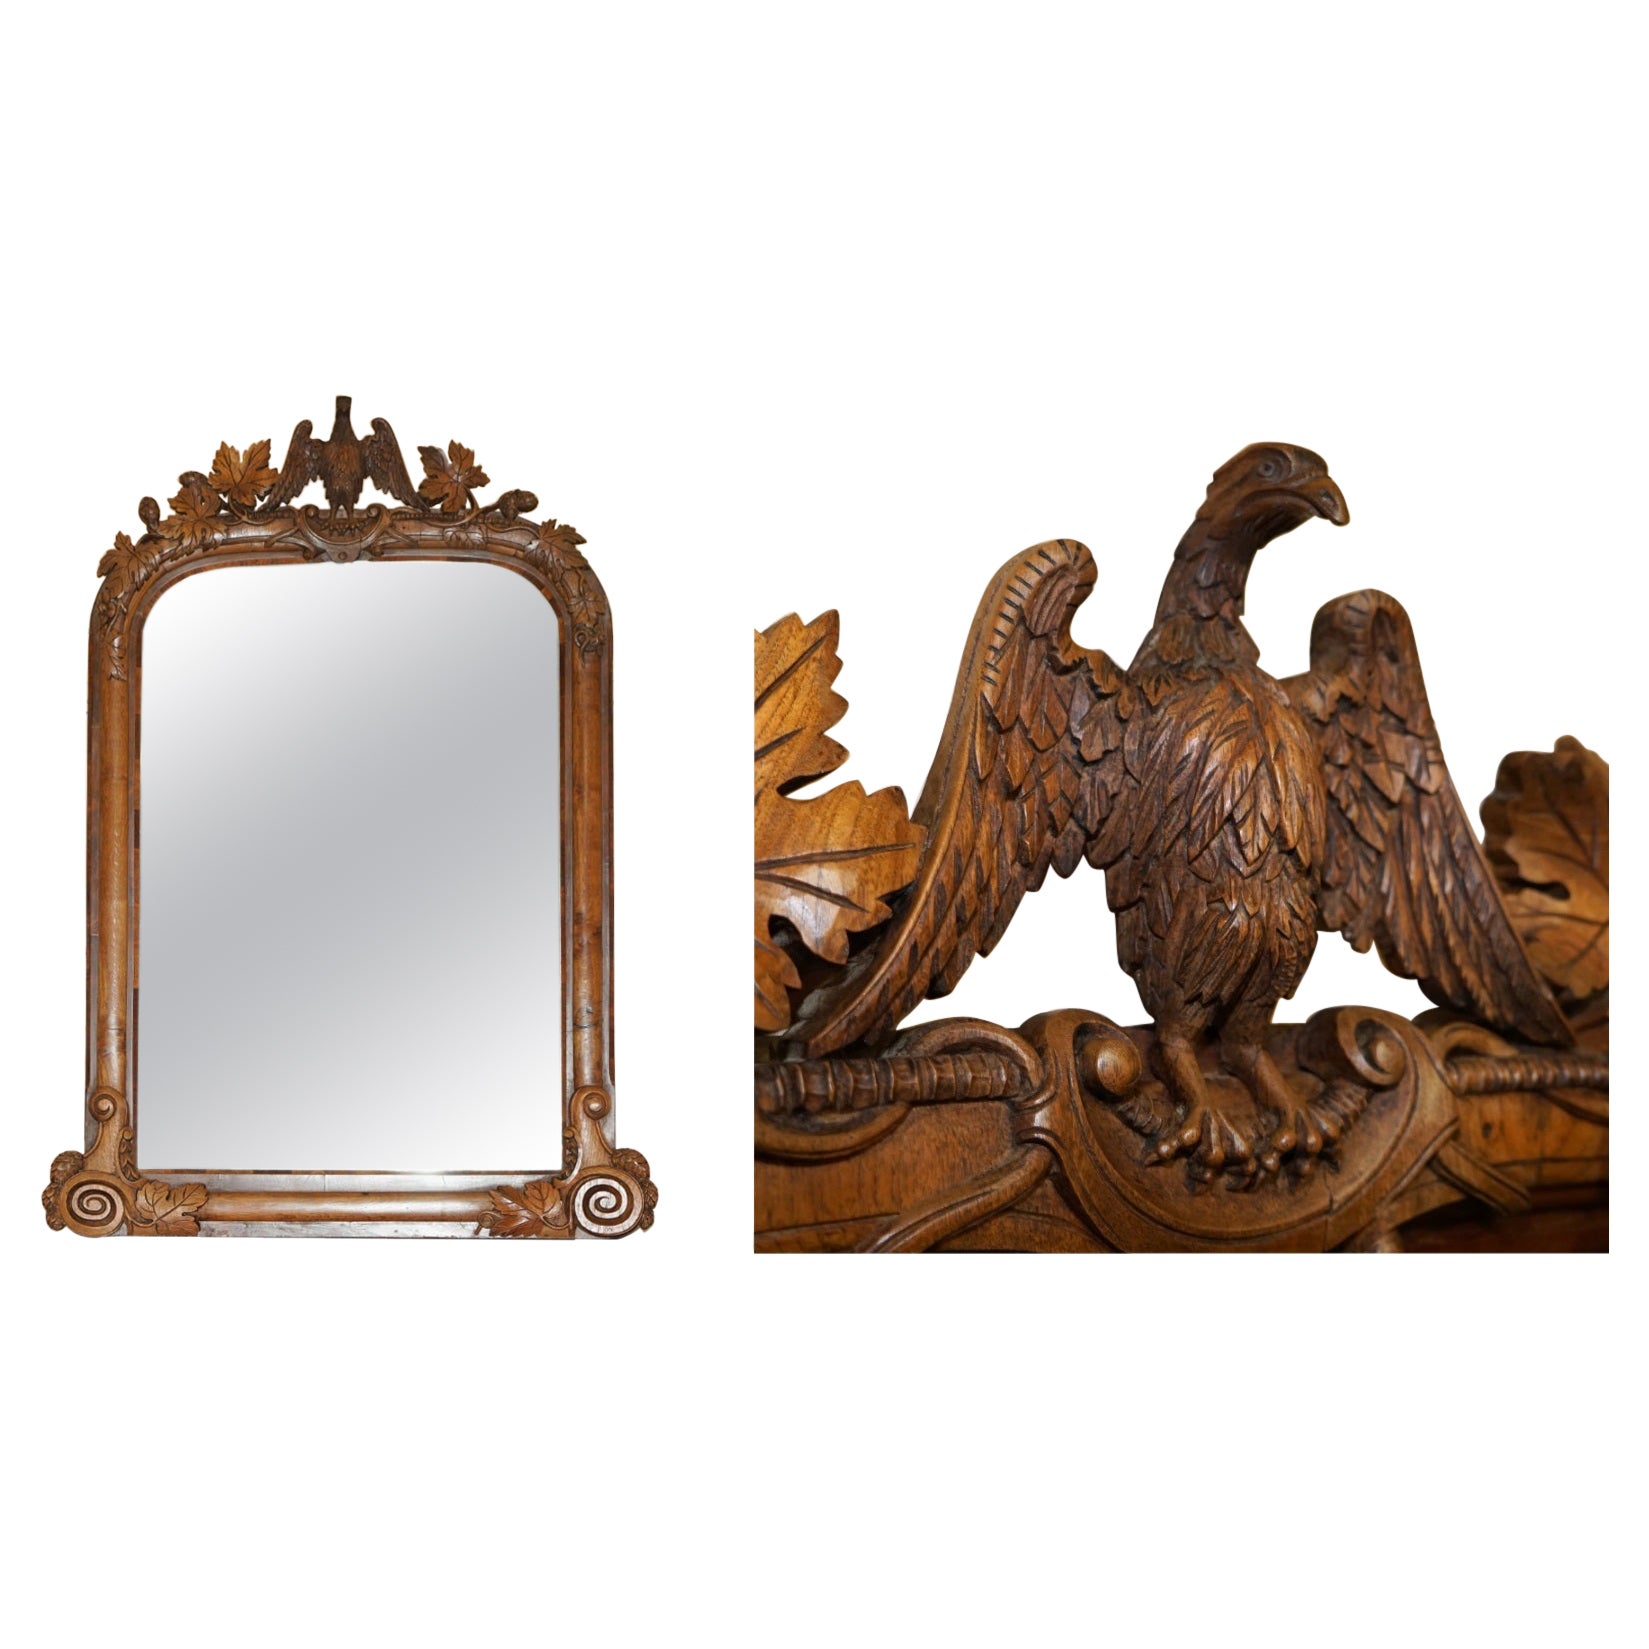 STUNNING ANTIQUE ViCTORIAN HAND CARVED CIR 1860 AMERICAN EAGLE OVERMANTLE MIRROR For Sale